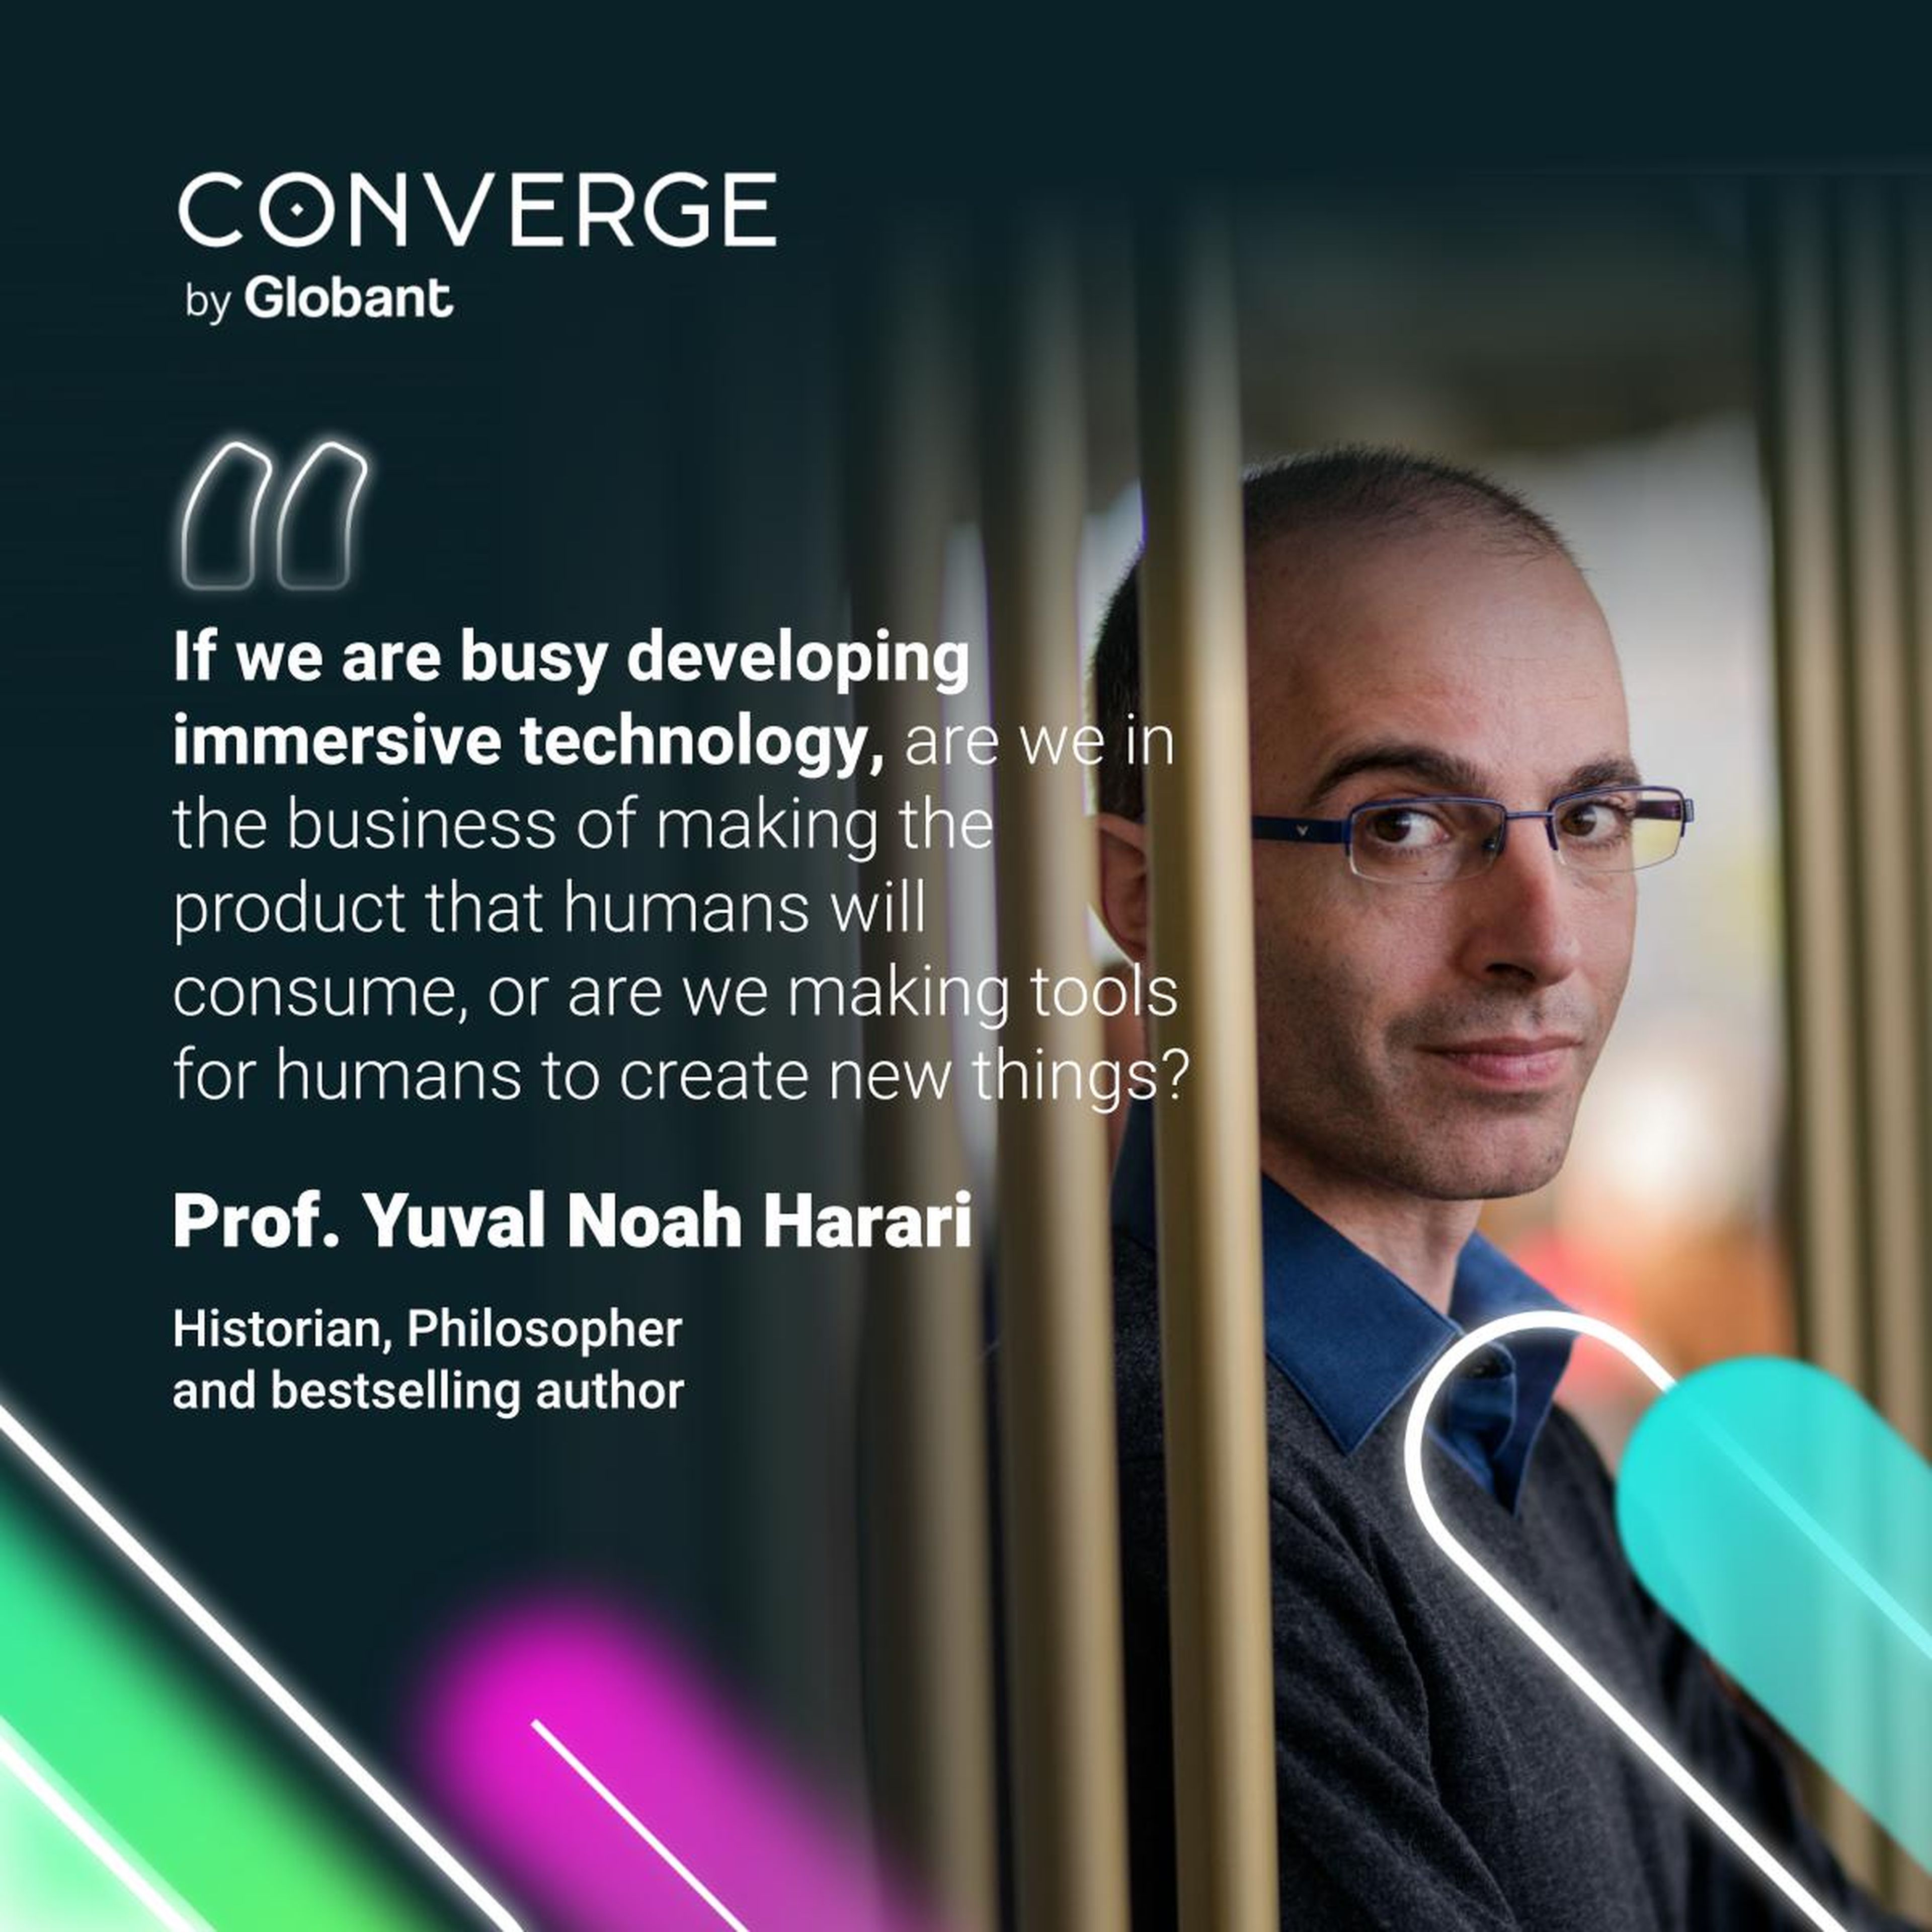 Converge power of reinvention - Yuval Harari